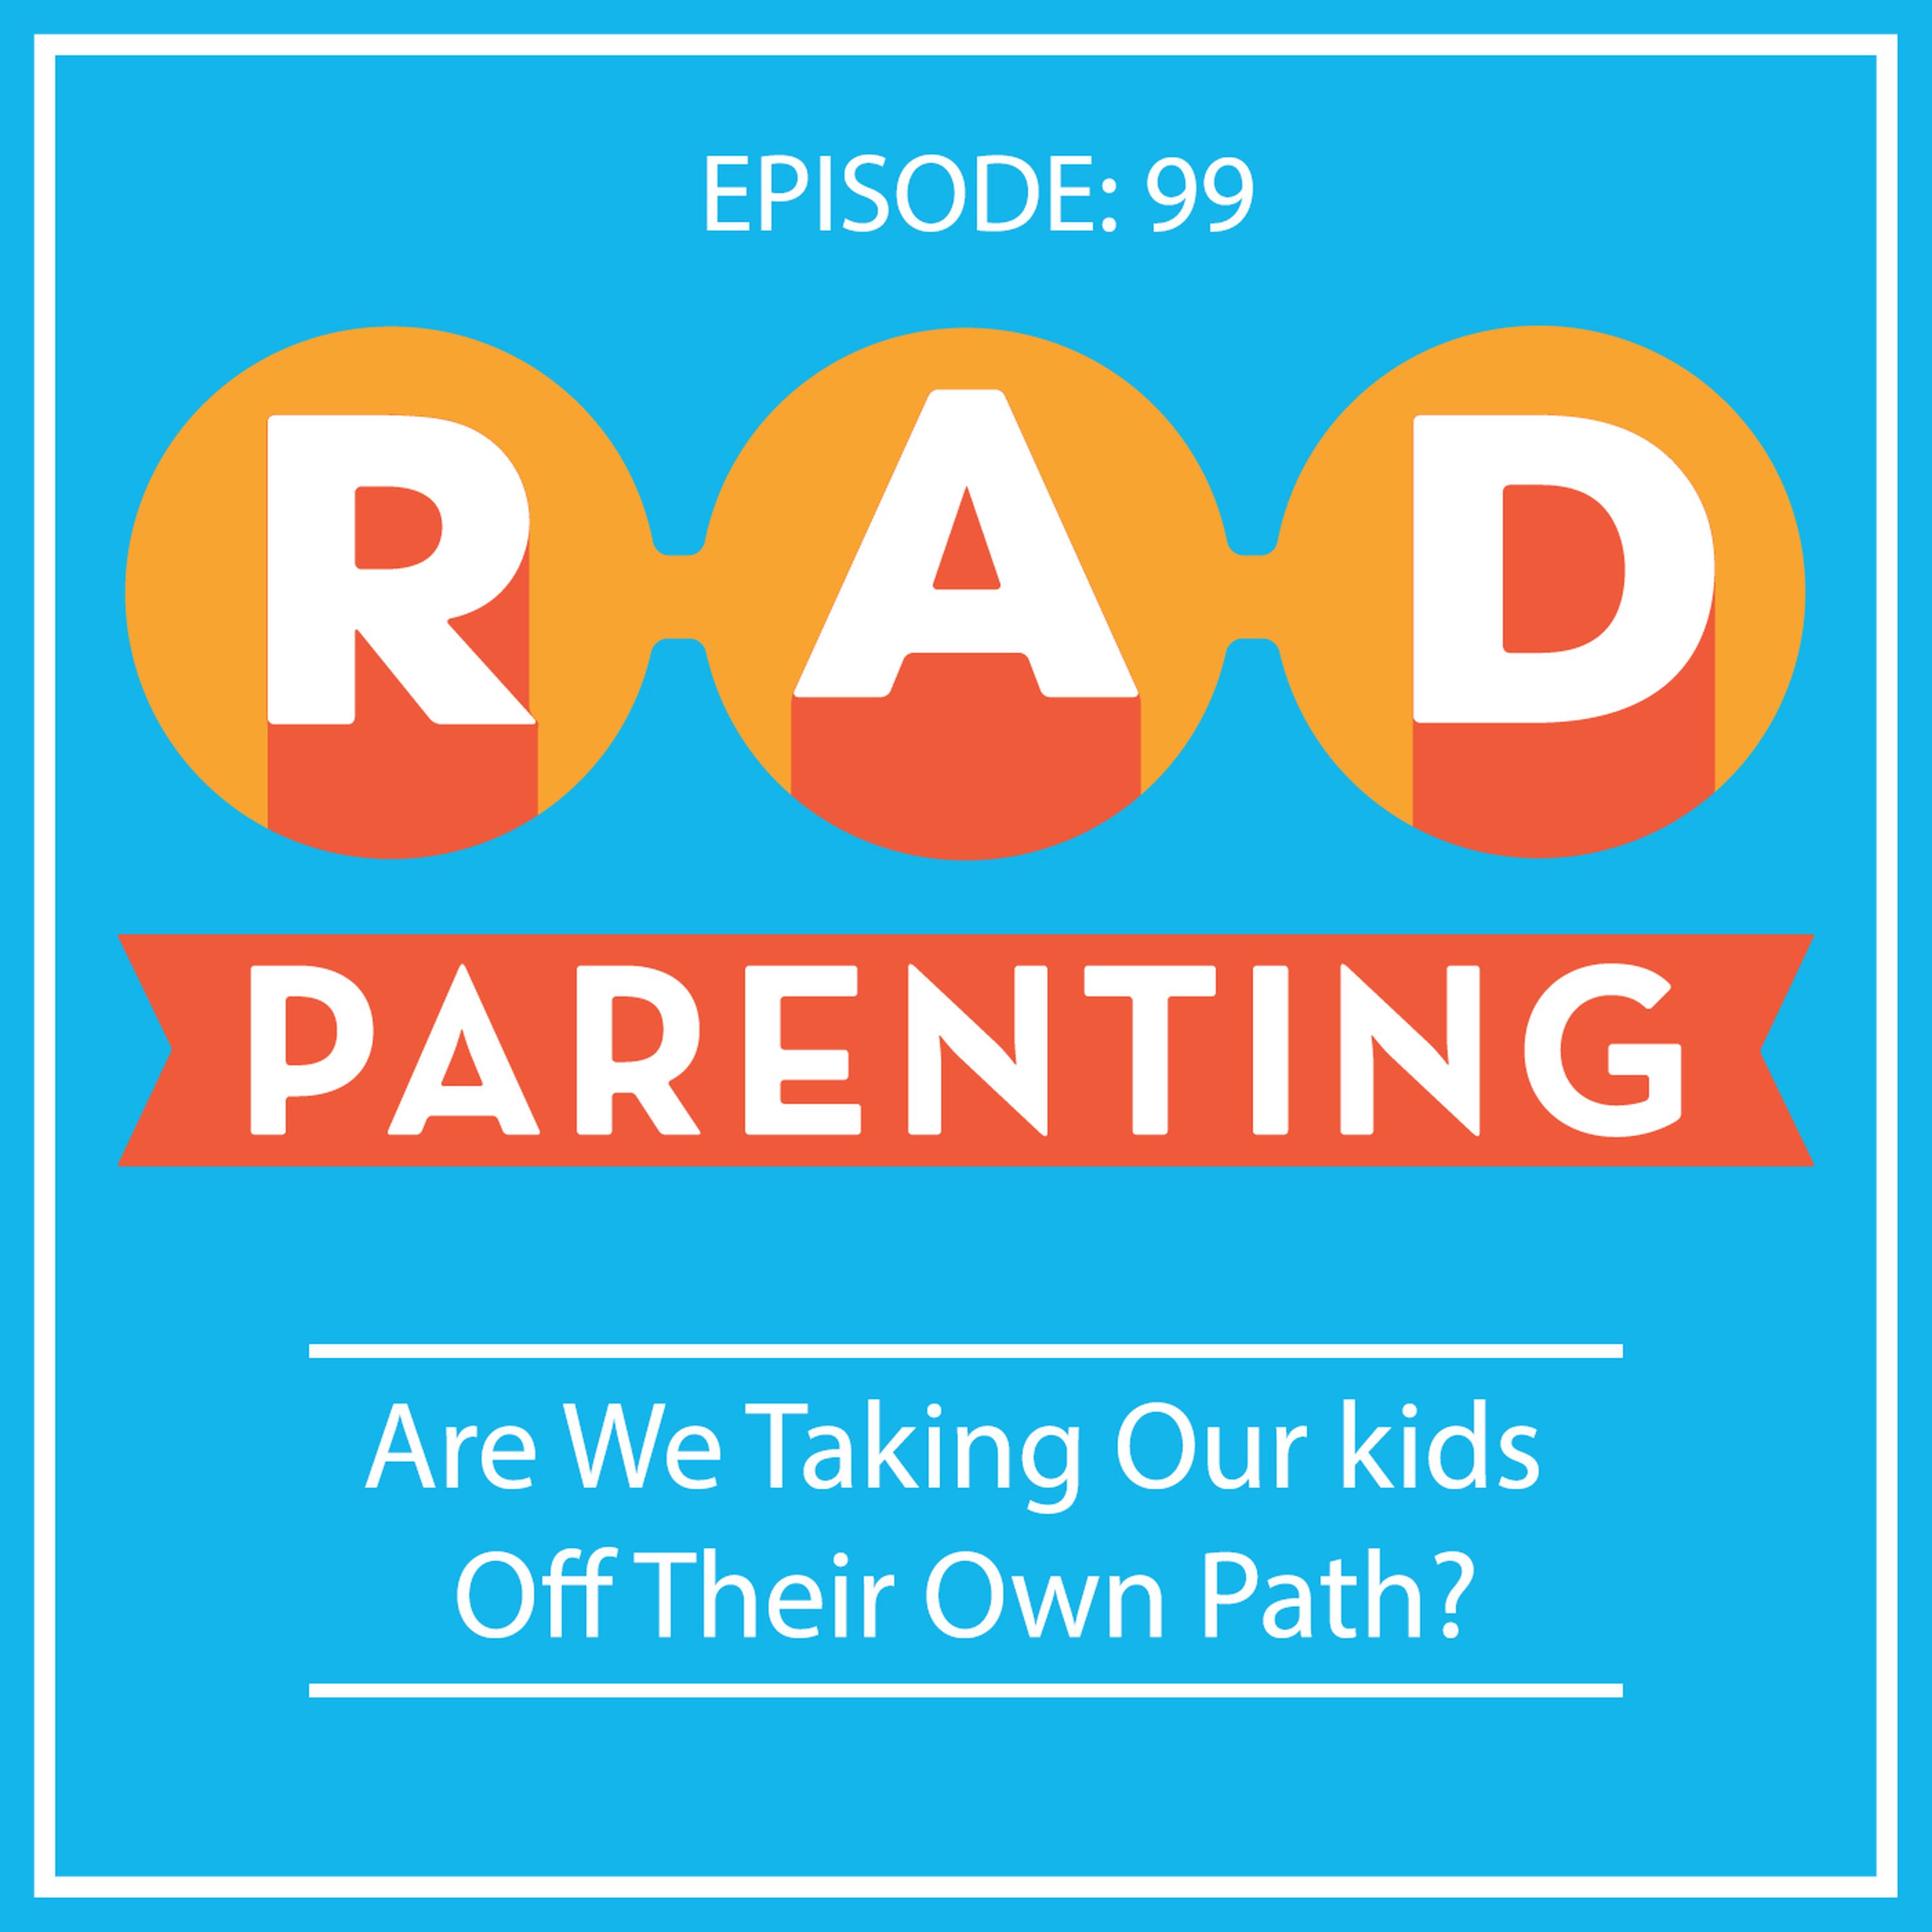 Are We Taking Our Kids Off Their Own Path?